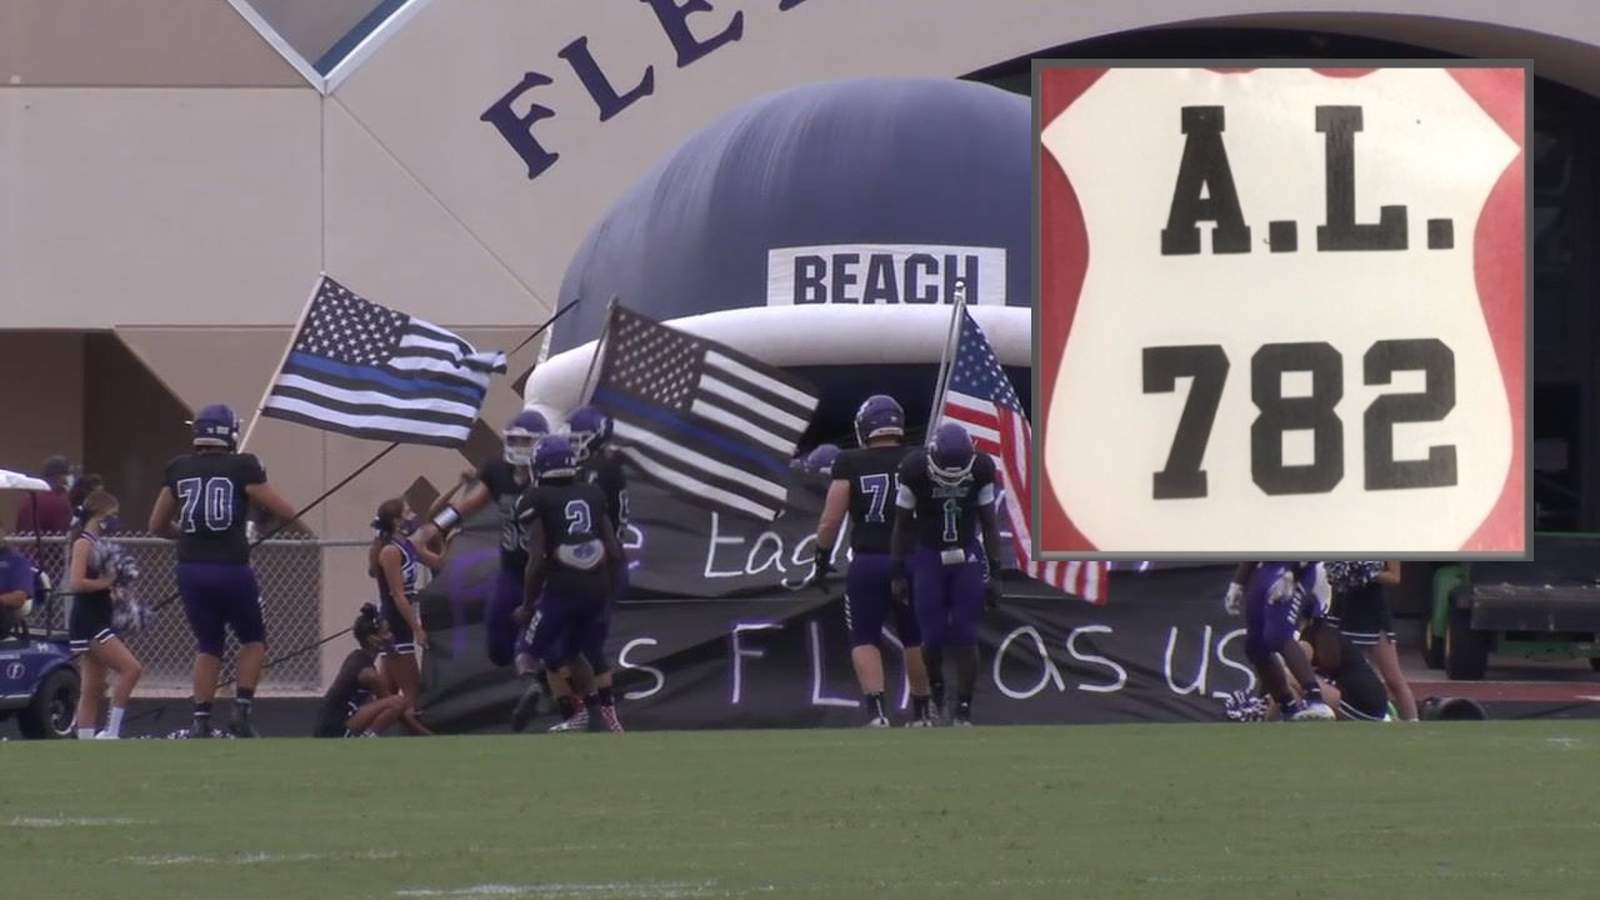 Fletcher High football players can wear decal honoring police officer